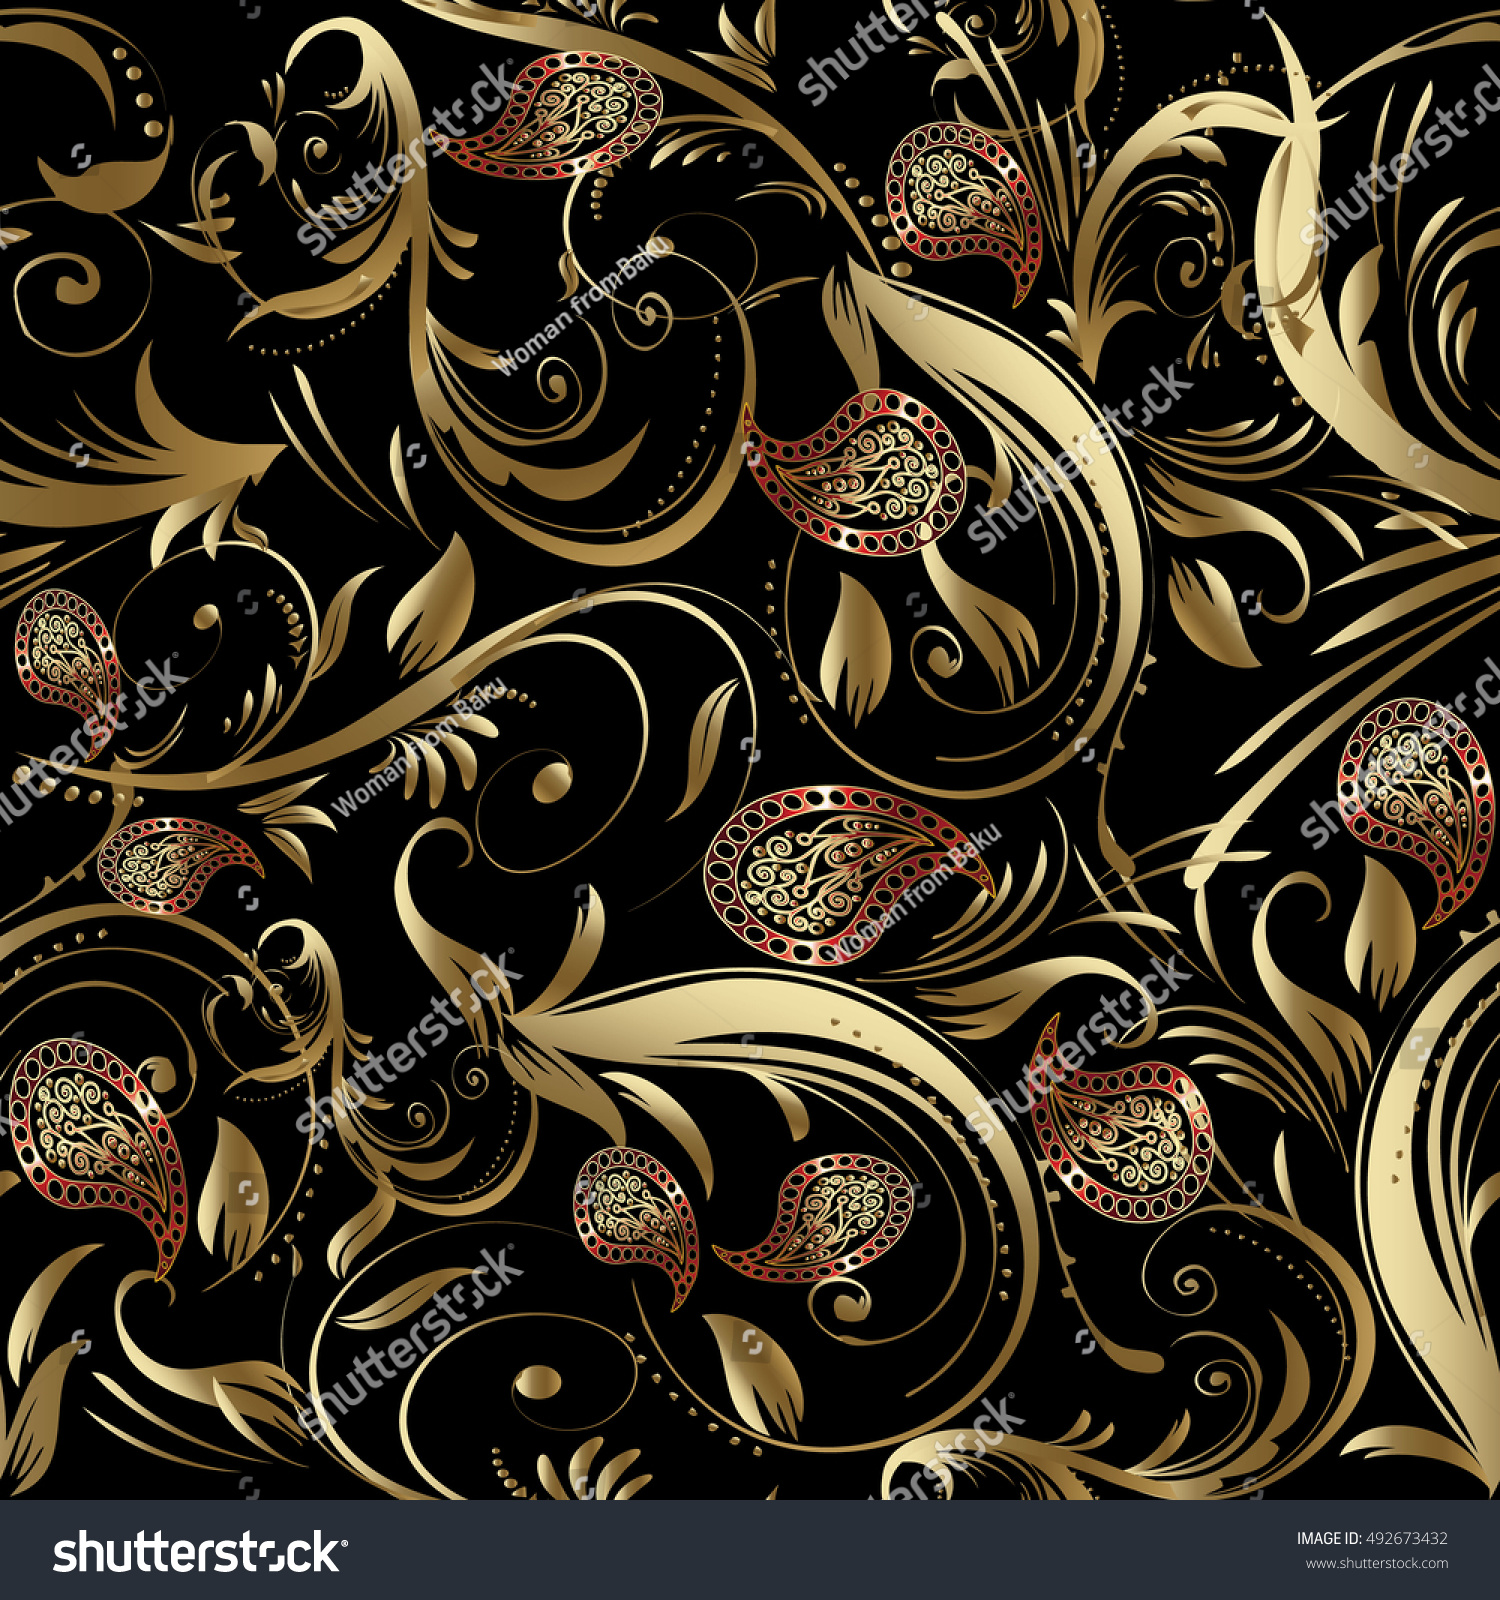 Paisley Floral Black Vector Seamless Pattern Stock Vector (Royalty Free ...